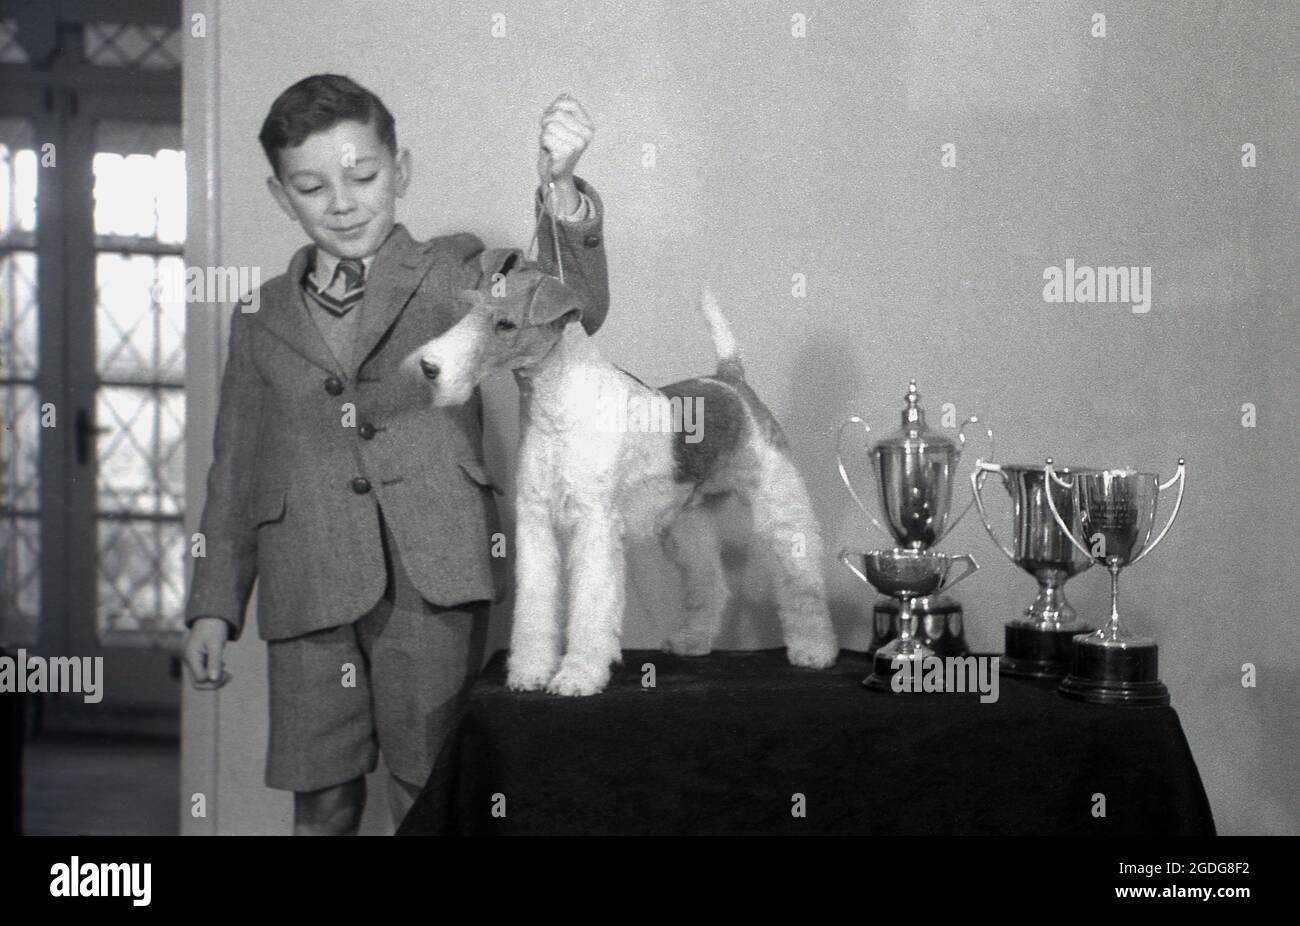 1955, historical, a young boy in his school unform proudly showing off his prize winning dog, a wire fox terrier, who is standing on a small table next to the several trophies he has won at dog shows, England, UK. Wth its distinctive looks, its wiry coat and expressive features, the Wire has been historically a successful show dog and a popular presence in films and television. In England, since the 1870s, Wire and Smooth Fox Terriers have been recognised as separate breeds, unlike the USA, when they were not recognised as distinct breeds until 1985. Stock Photo